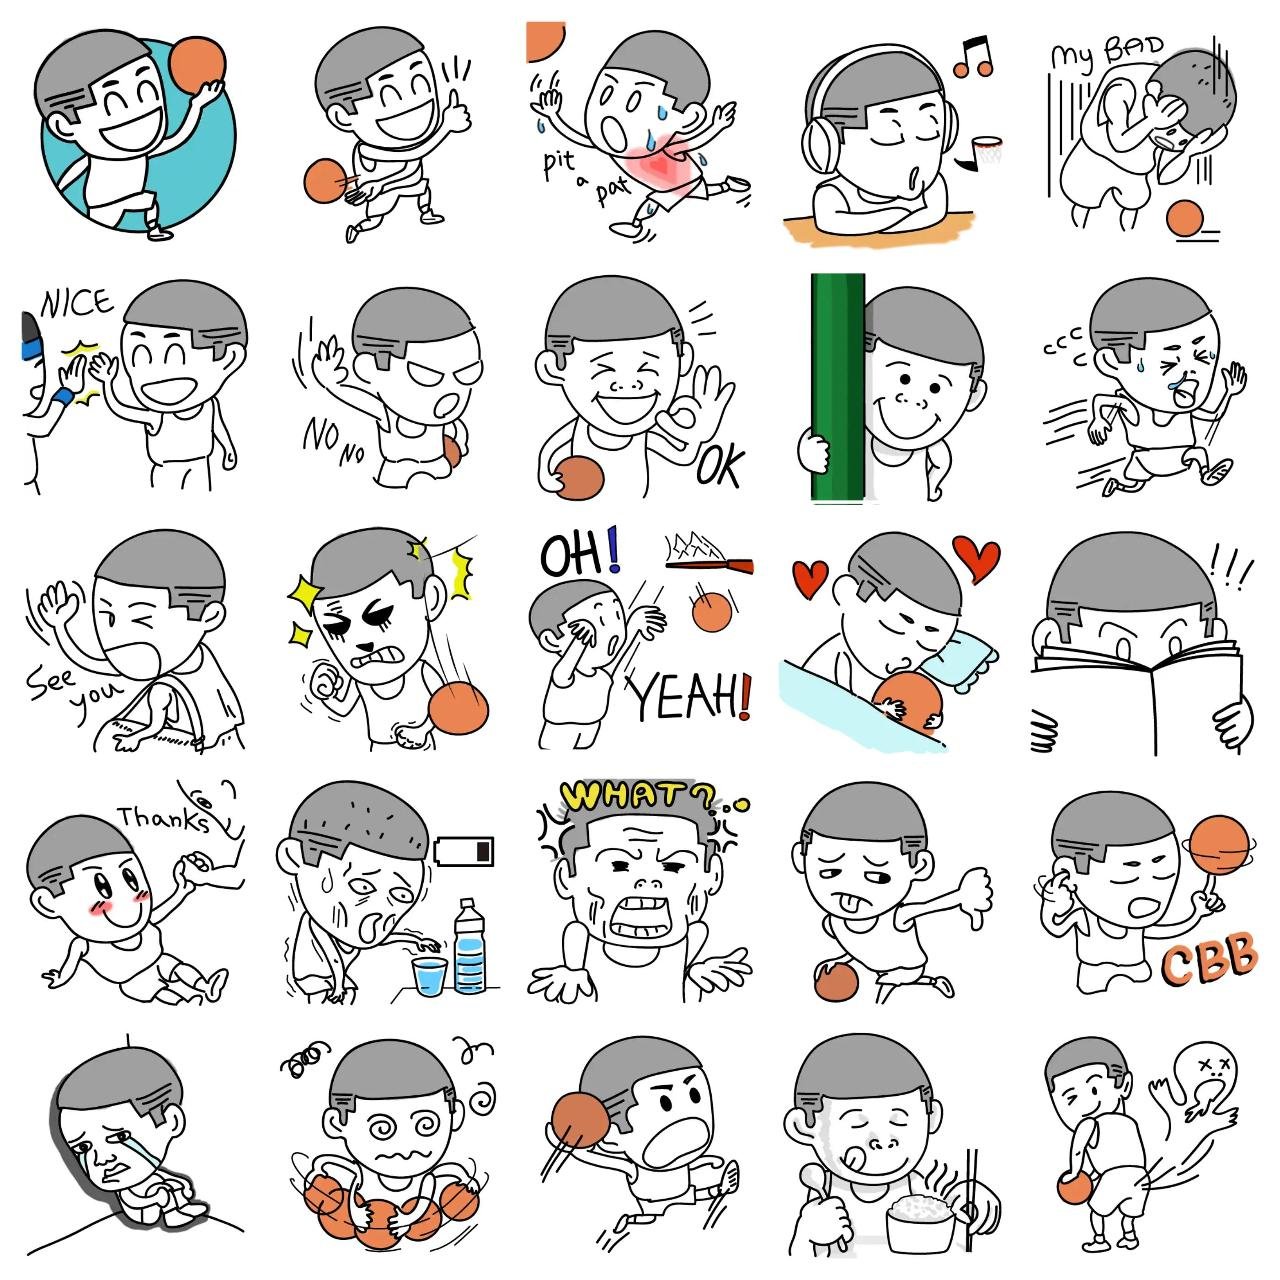 The buzz cut boy loves baseball People,Sports sticker pack for Whatsapp, Telegram, Signal, and others chatting and message apps